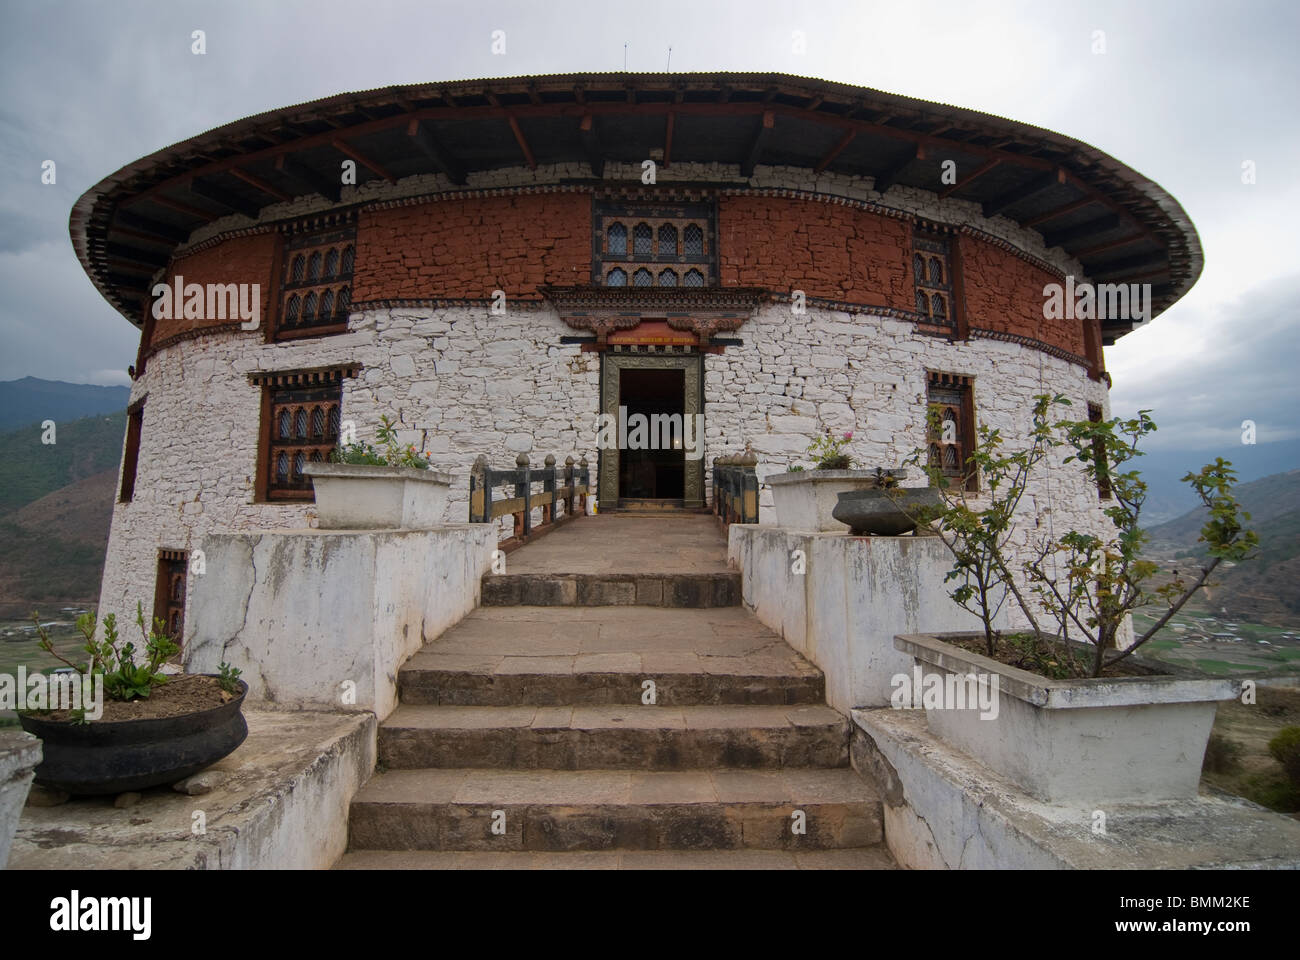 National museum in a former buddhistic monastery,Paro, Bhutan,Asia Stock Photo